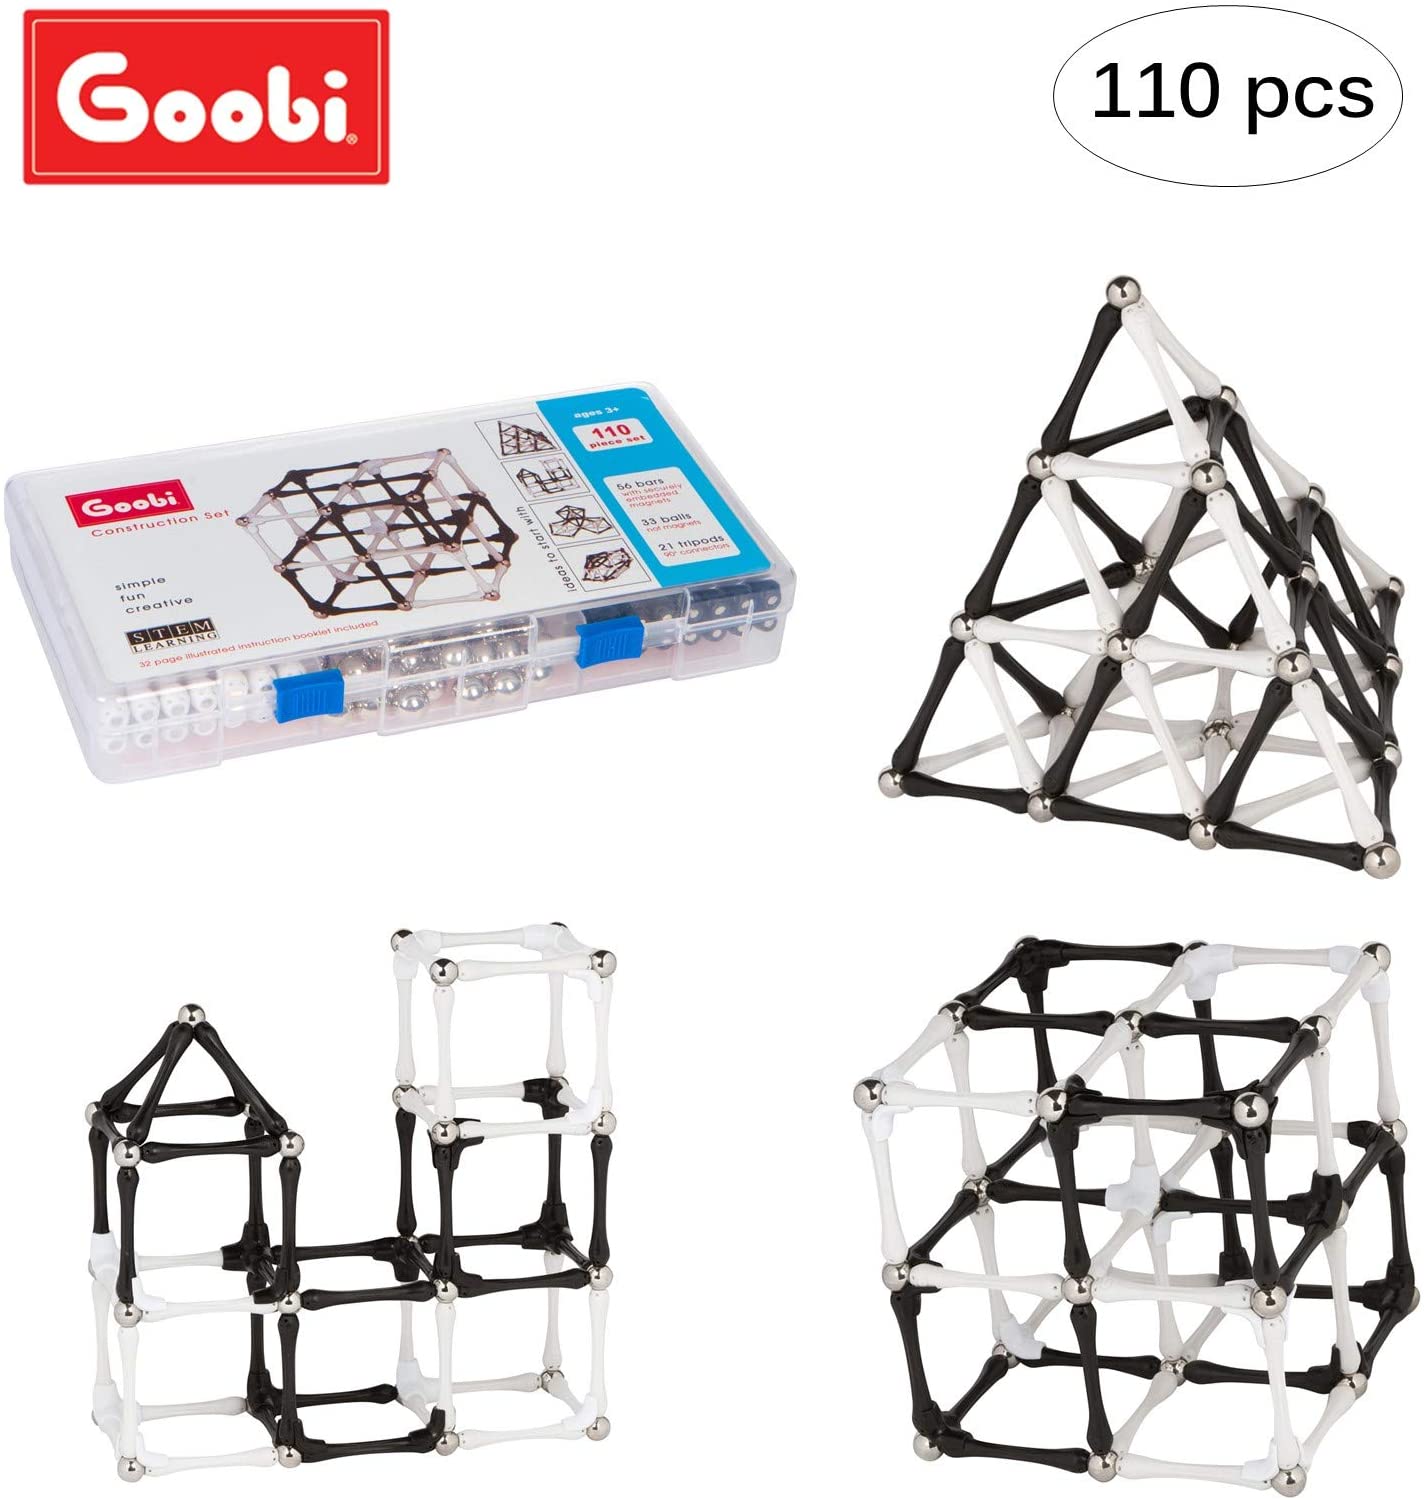 Goobi 110 Piece Construction Set Building Toy Active Play Sticks STEM Learning Creativity Imagination Children&amp;amp;amp;amp;rsquo;s 3D Puzzle Educational Brain Toys for Kids Boys and Girls with Instruction Booklet